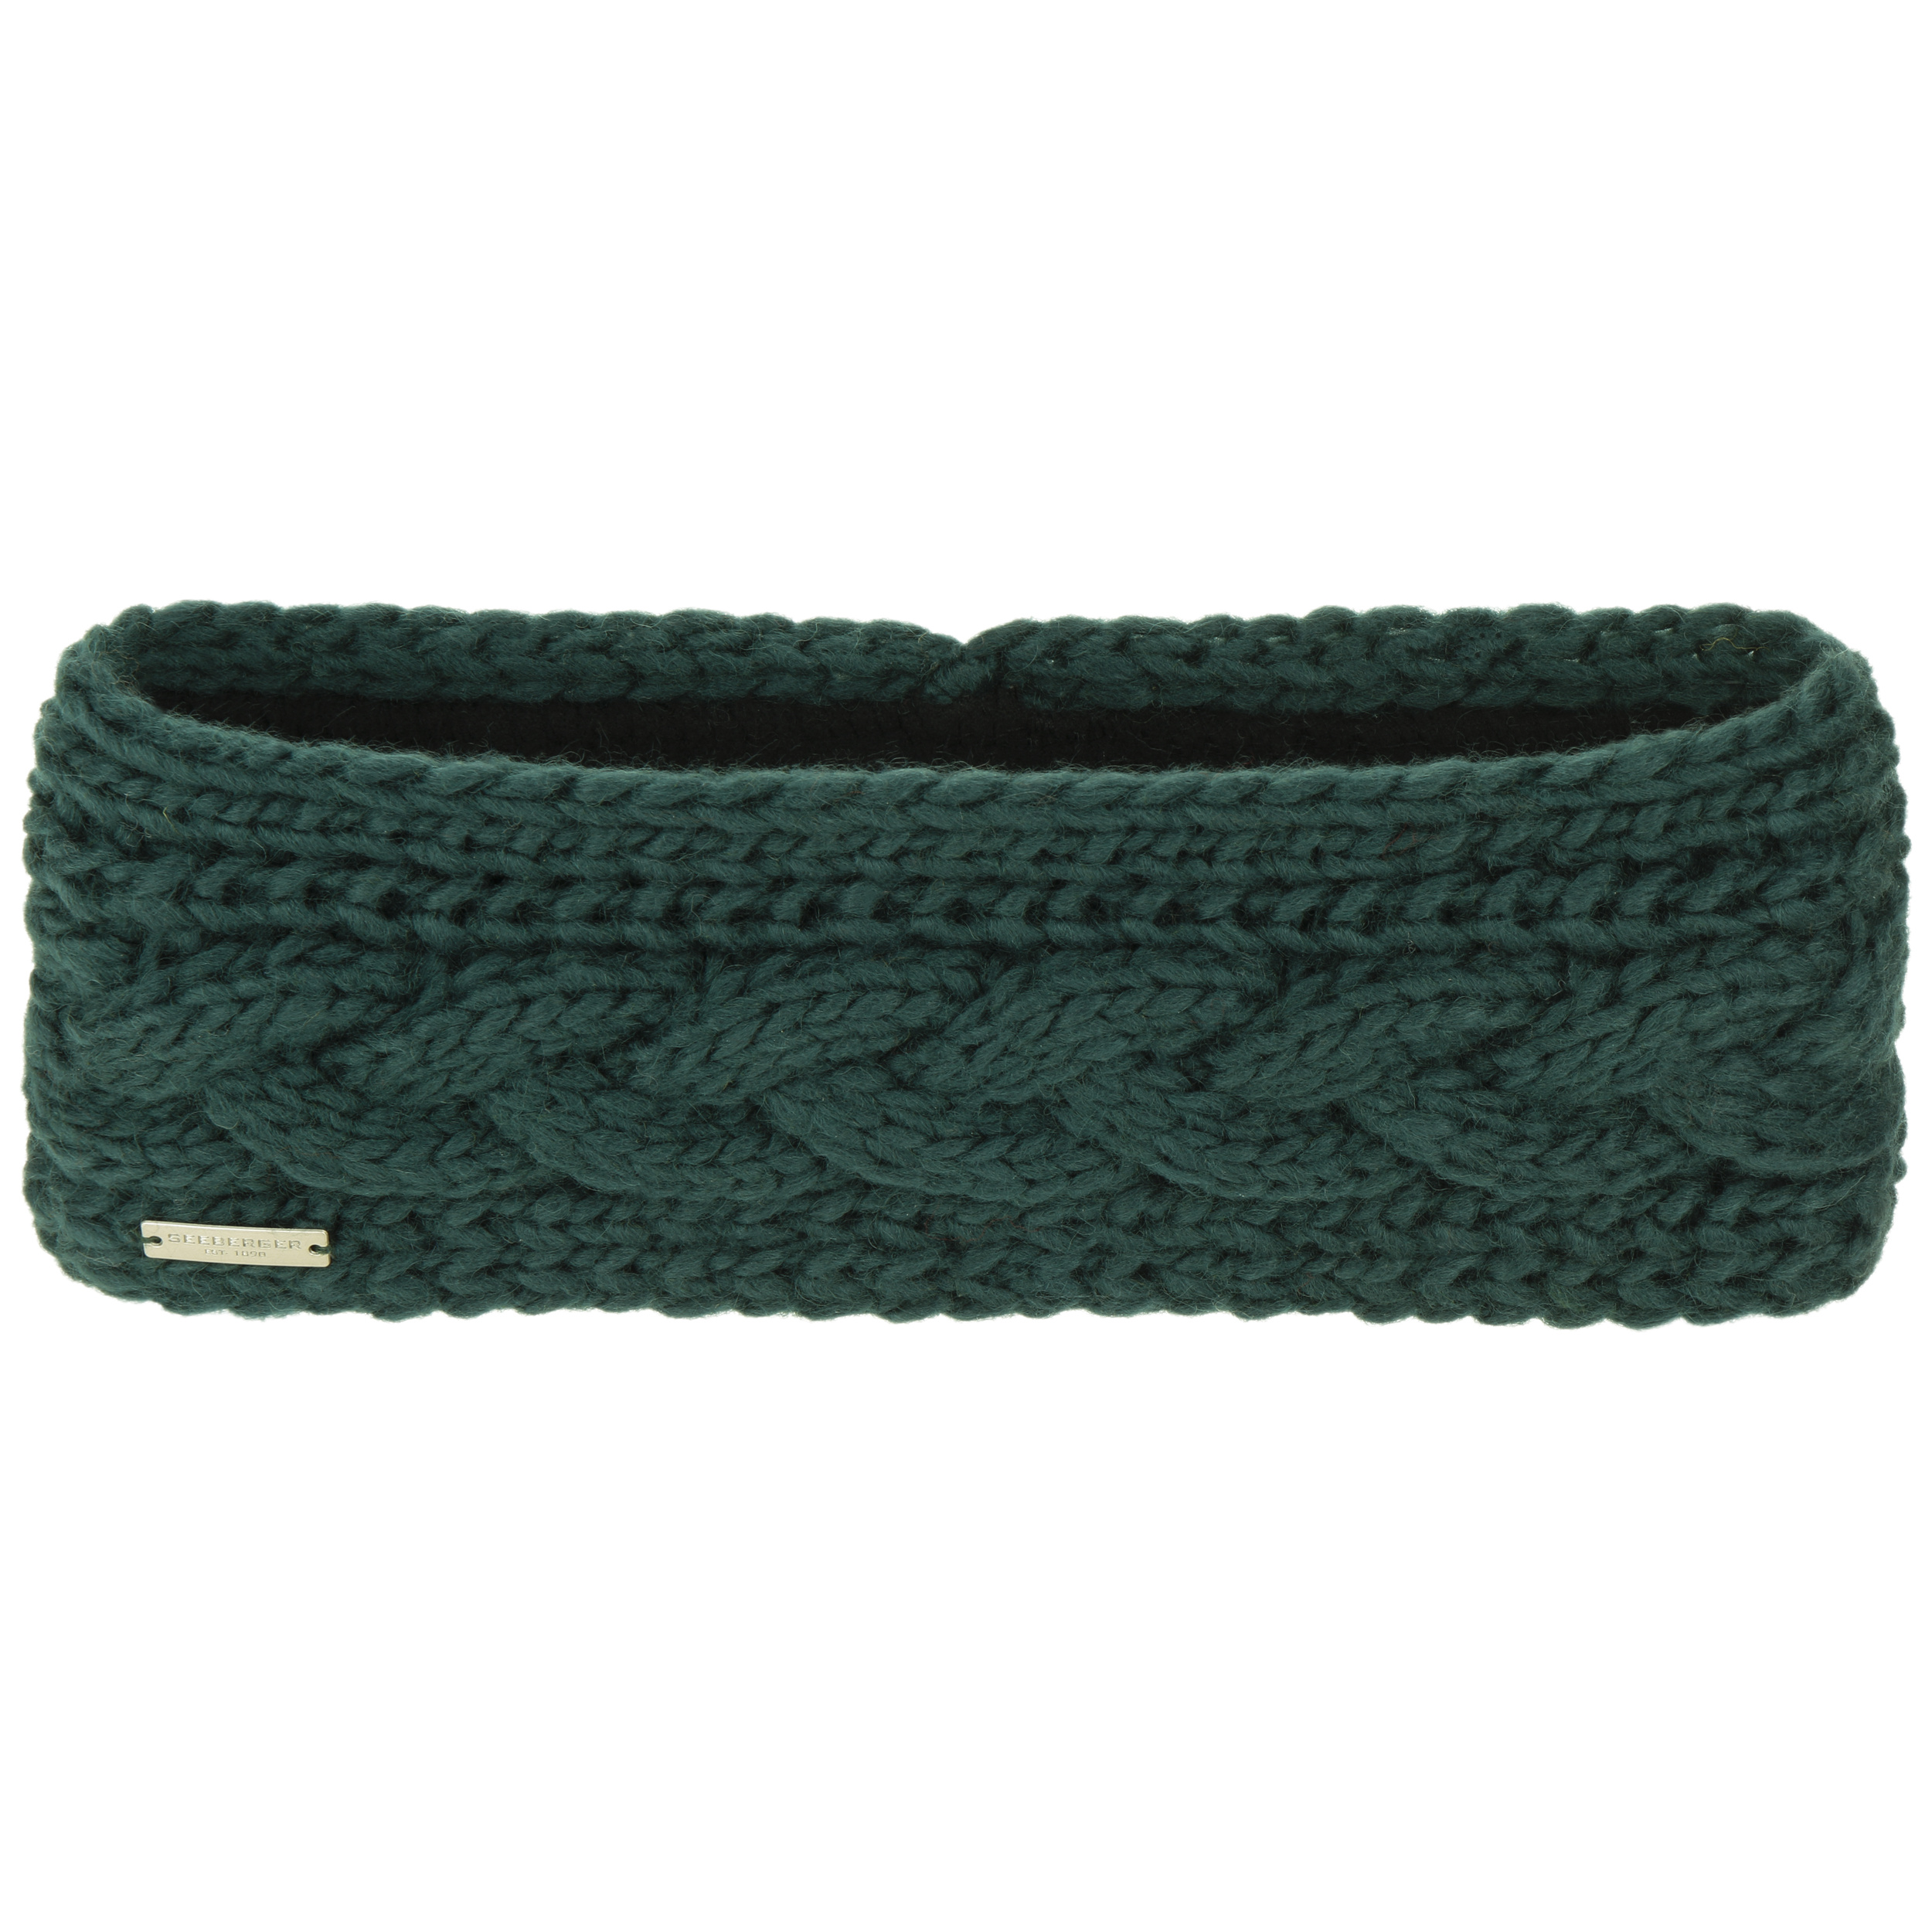 - € Stirnband Classic Seeberger Cable Knit 19,95 by